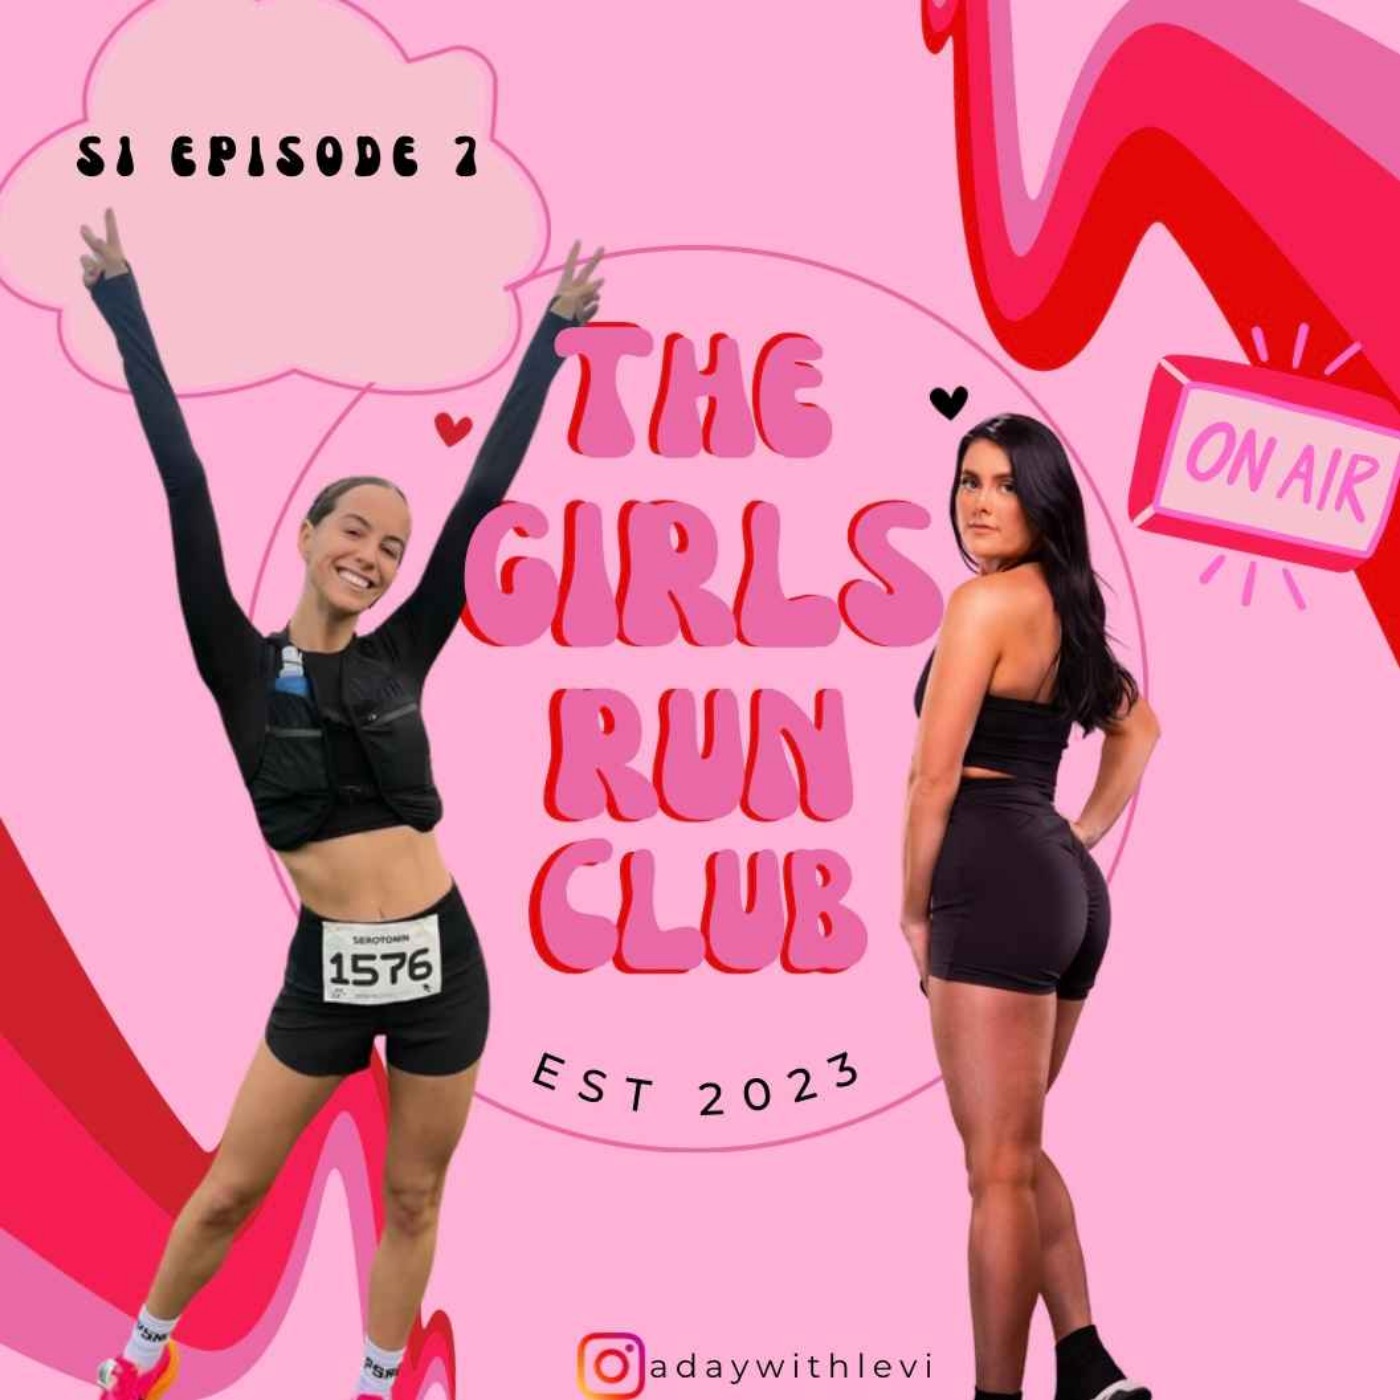 Gym girl to runner, half marathon training, calorie counting, food & not comparing yourself.